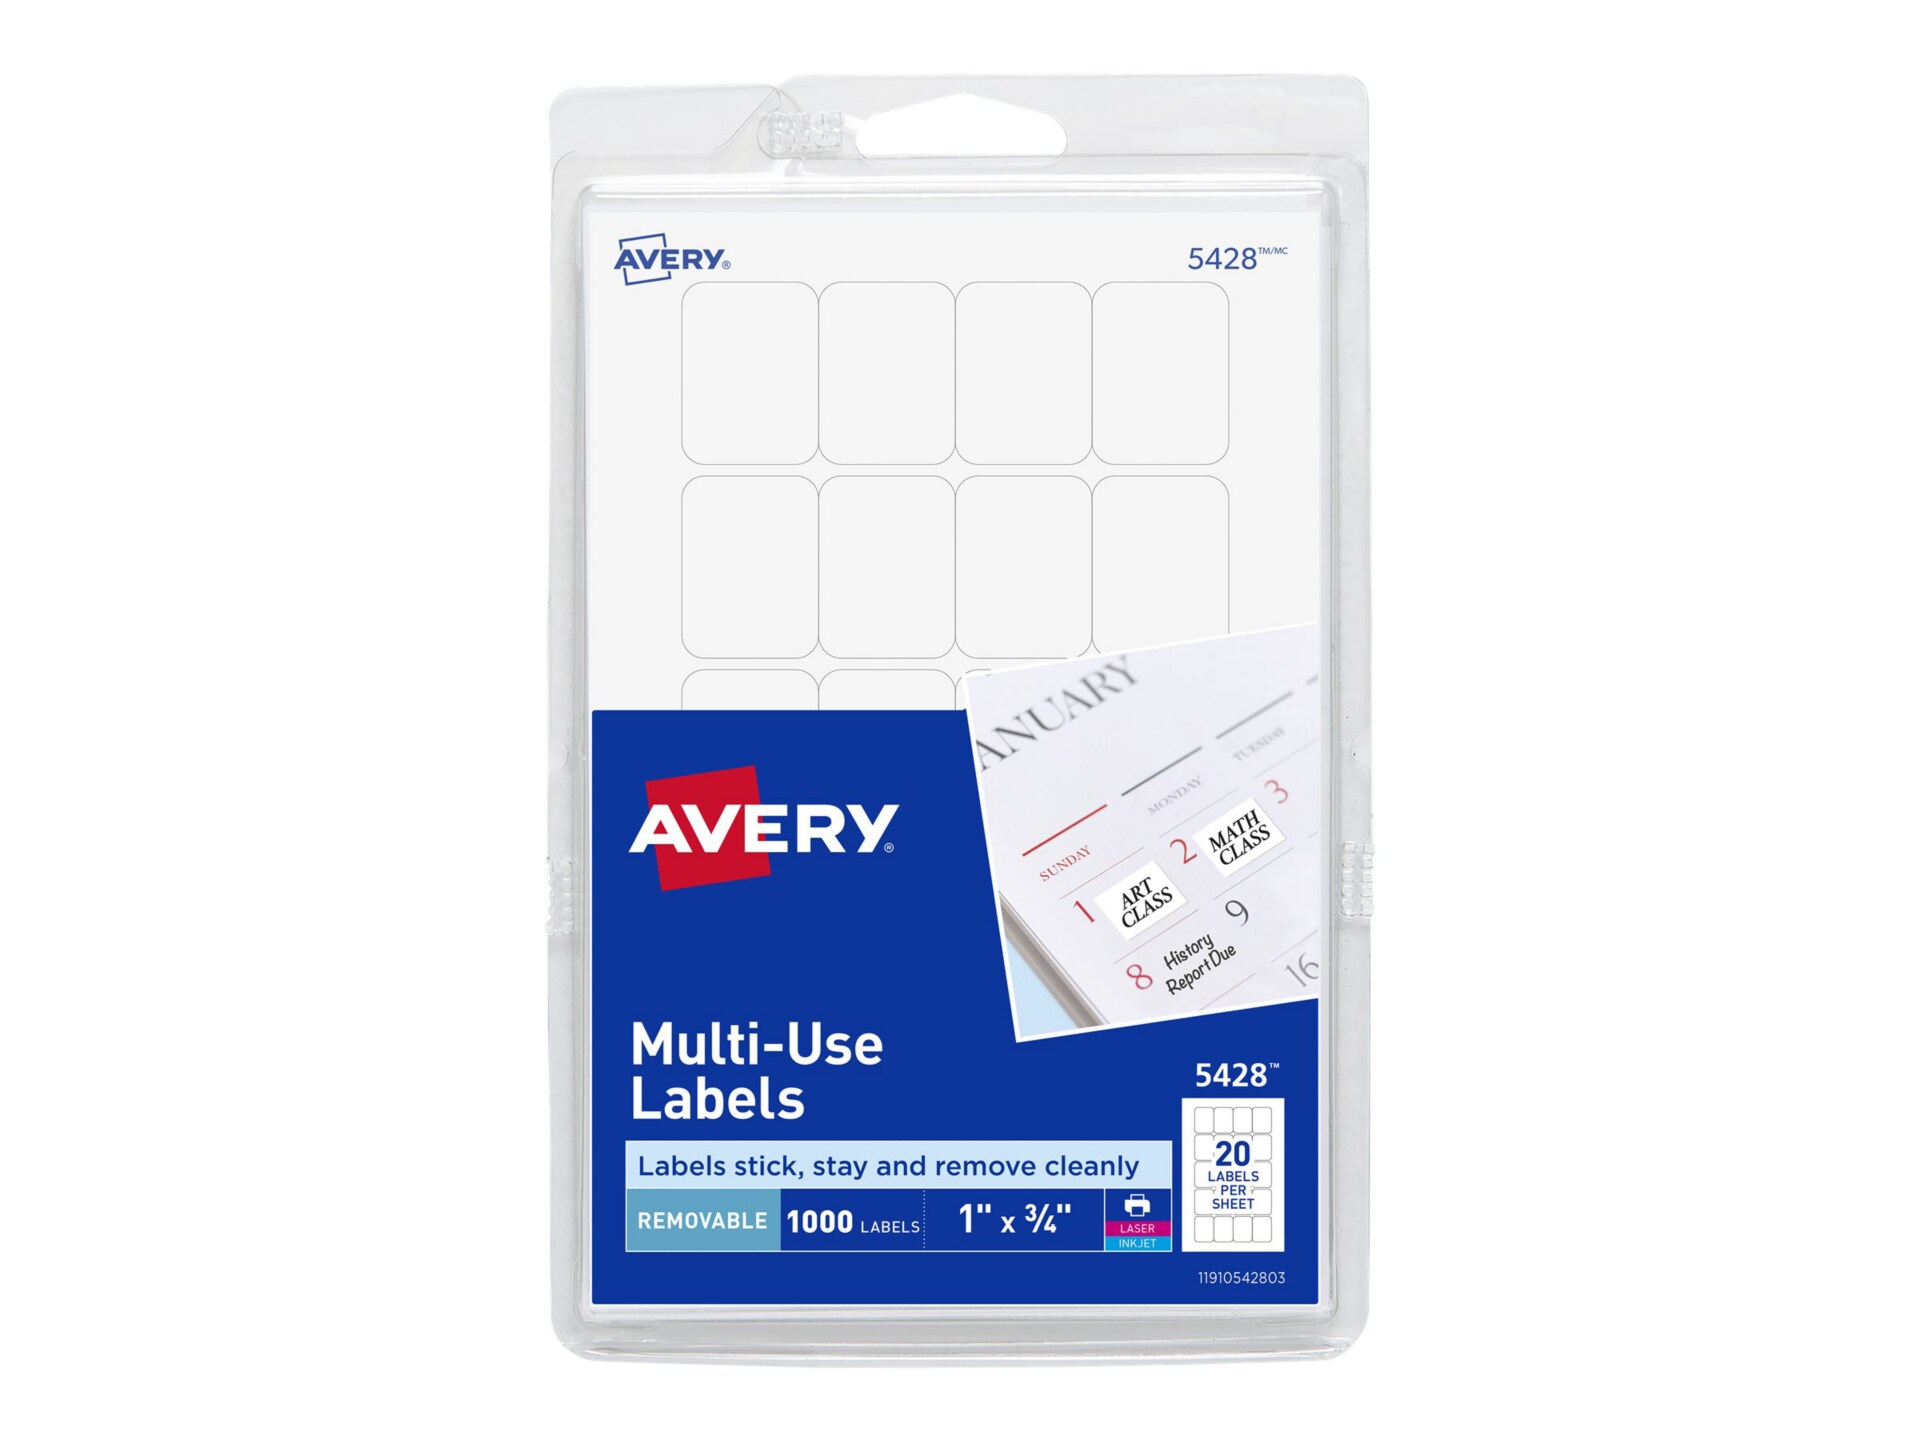 Avery Multi-Use Labels - labels - 1000 label(s) - 0.75 in x 1 in